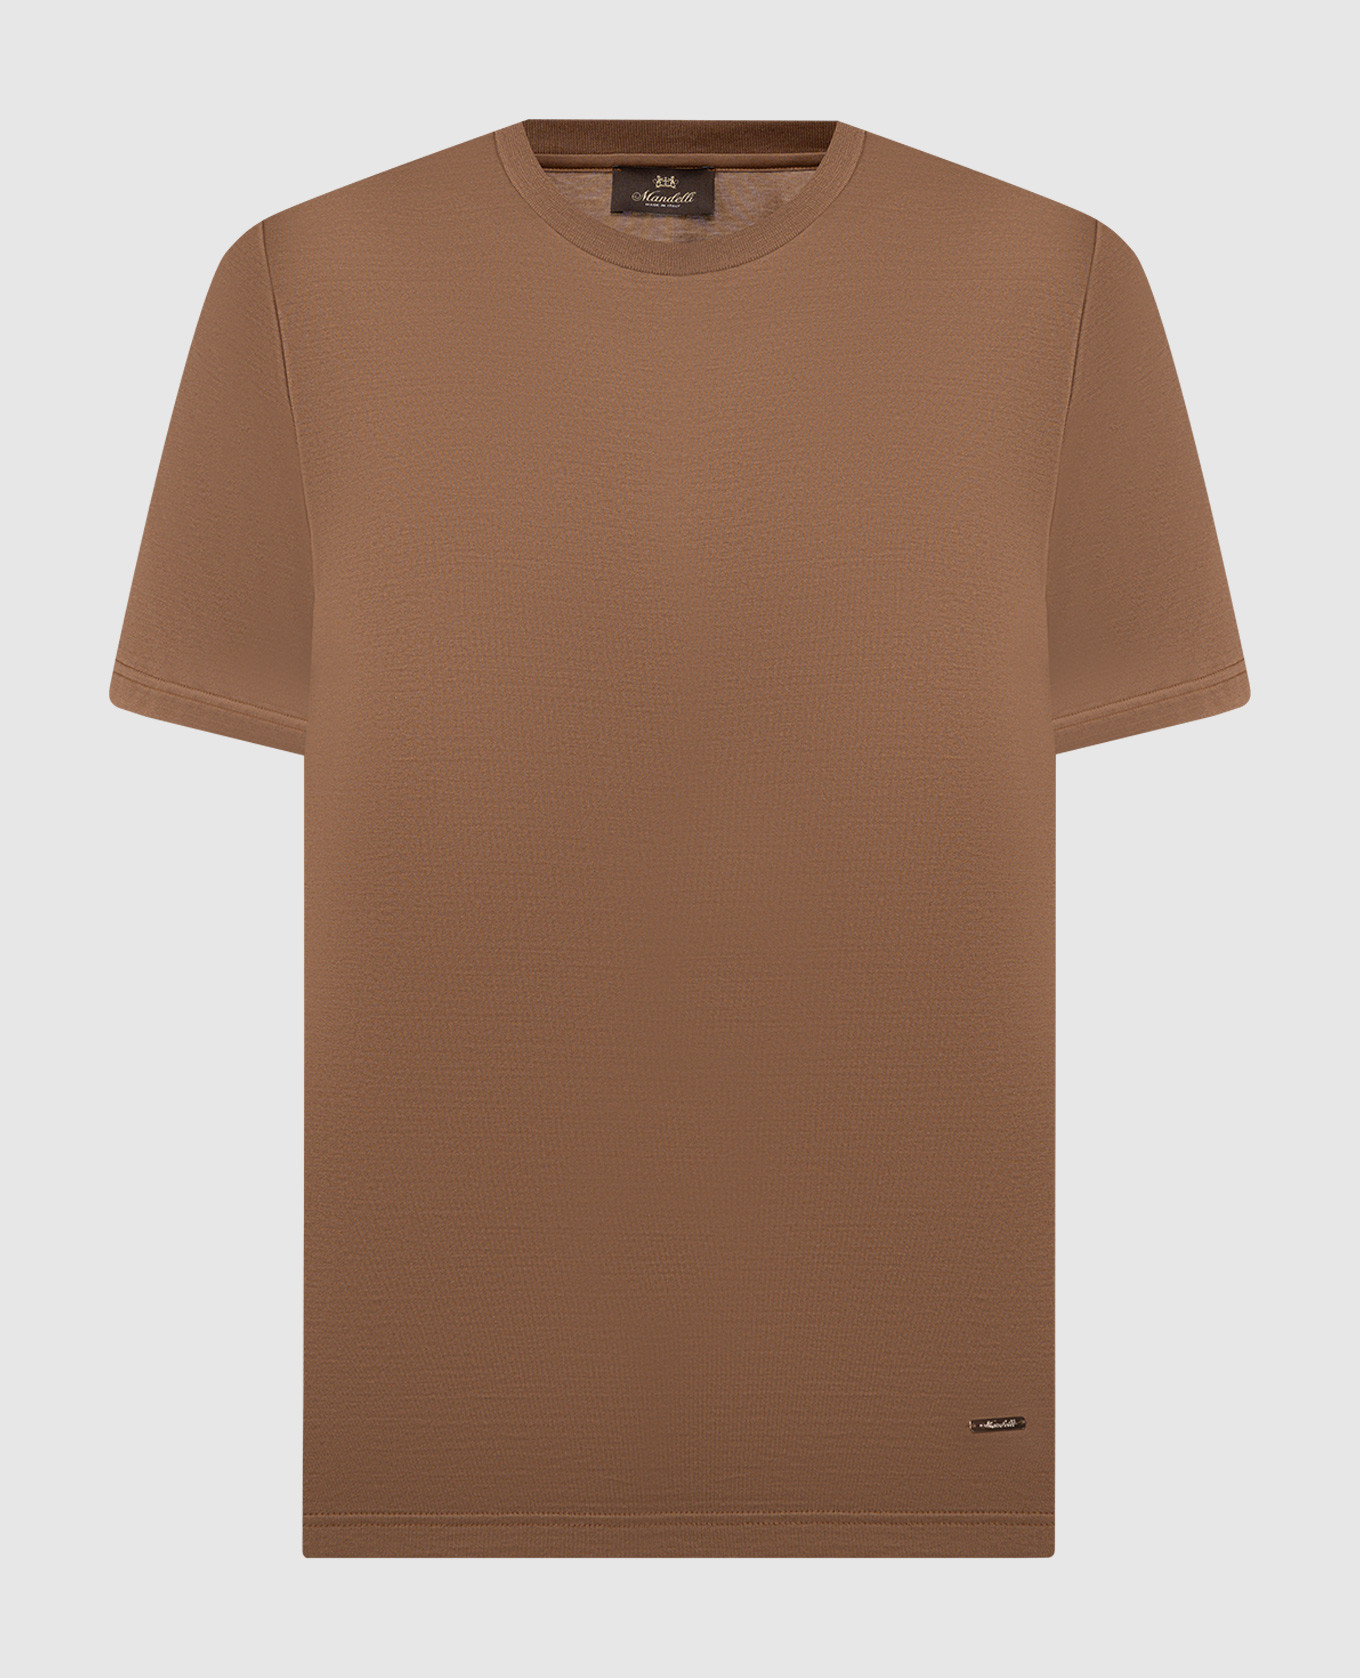 Brown t-shirt with logo